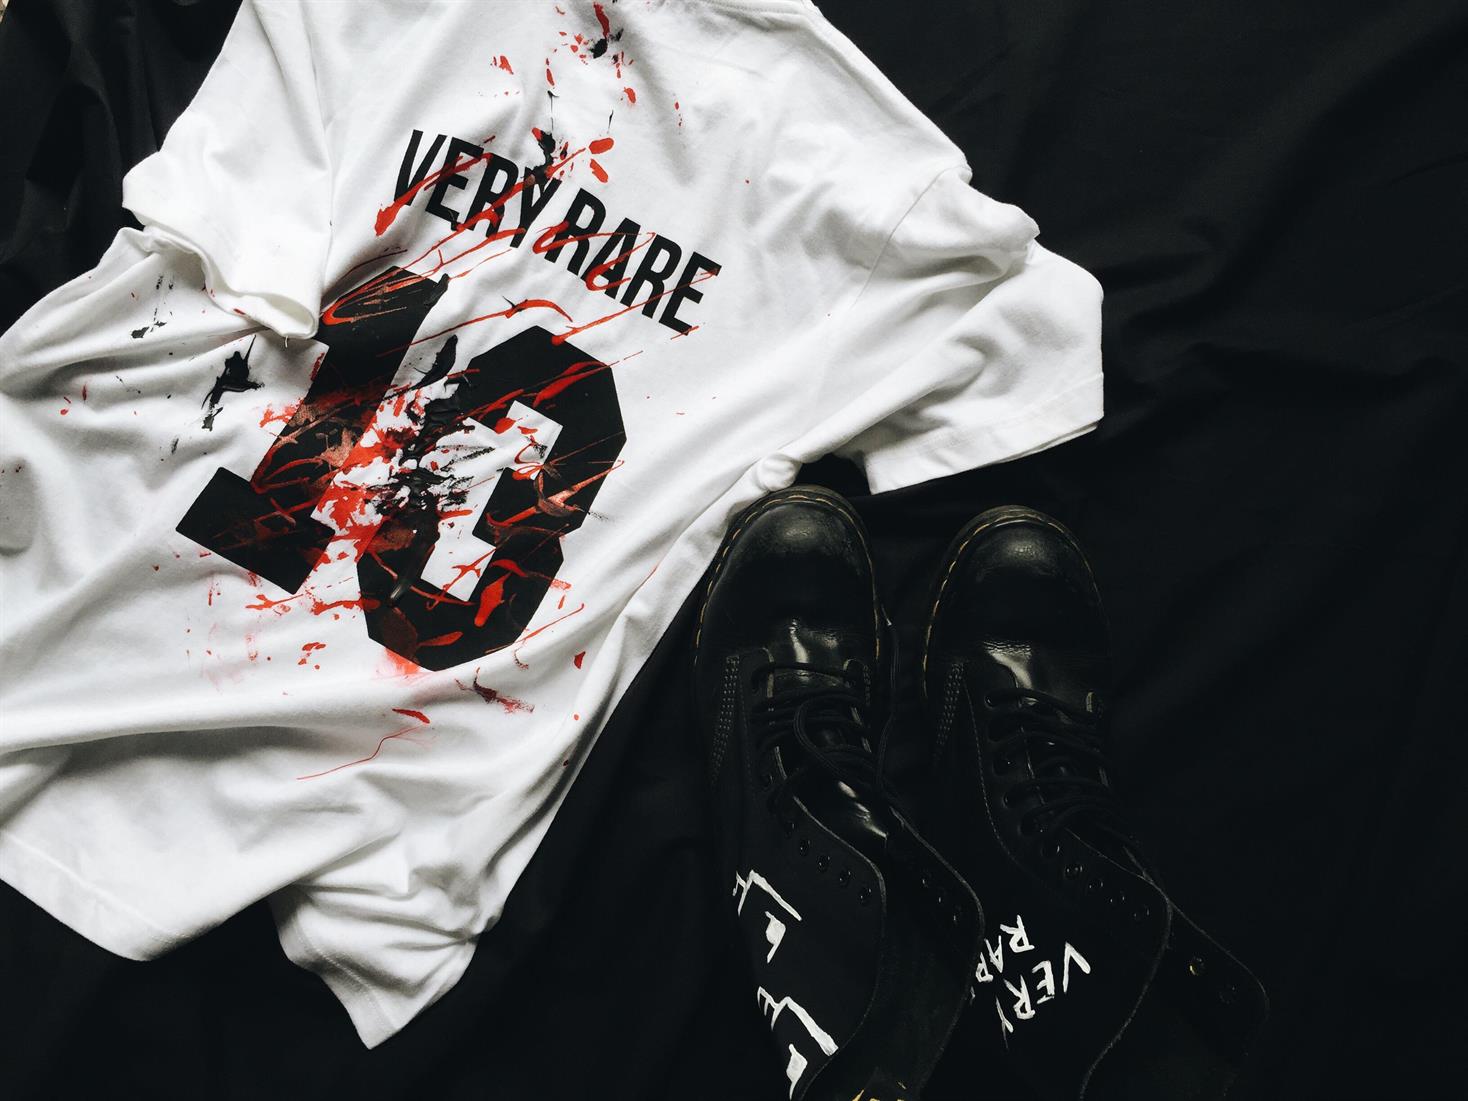 VERY RARE - spilled paint t-shirt and bauhaus dr martens boots - by sven harambasic